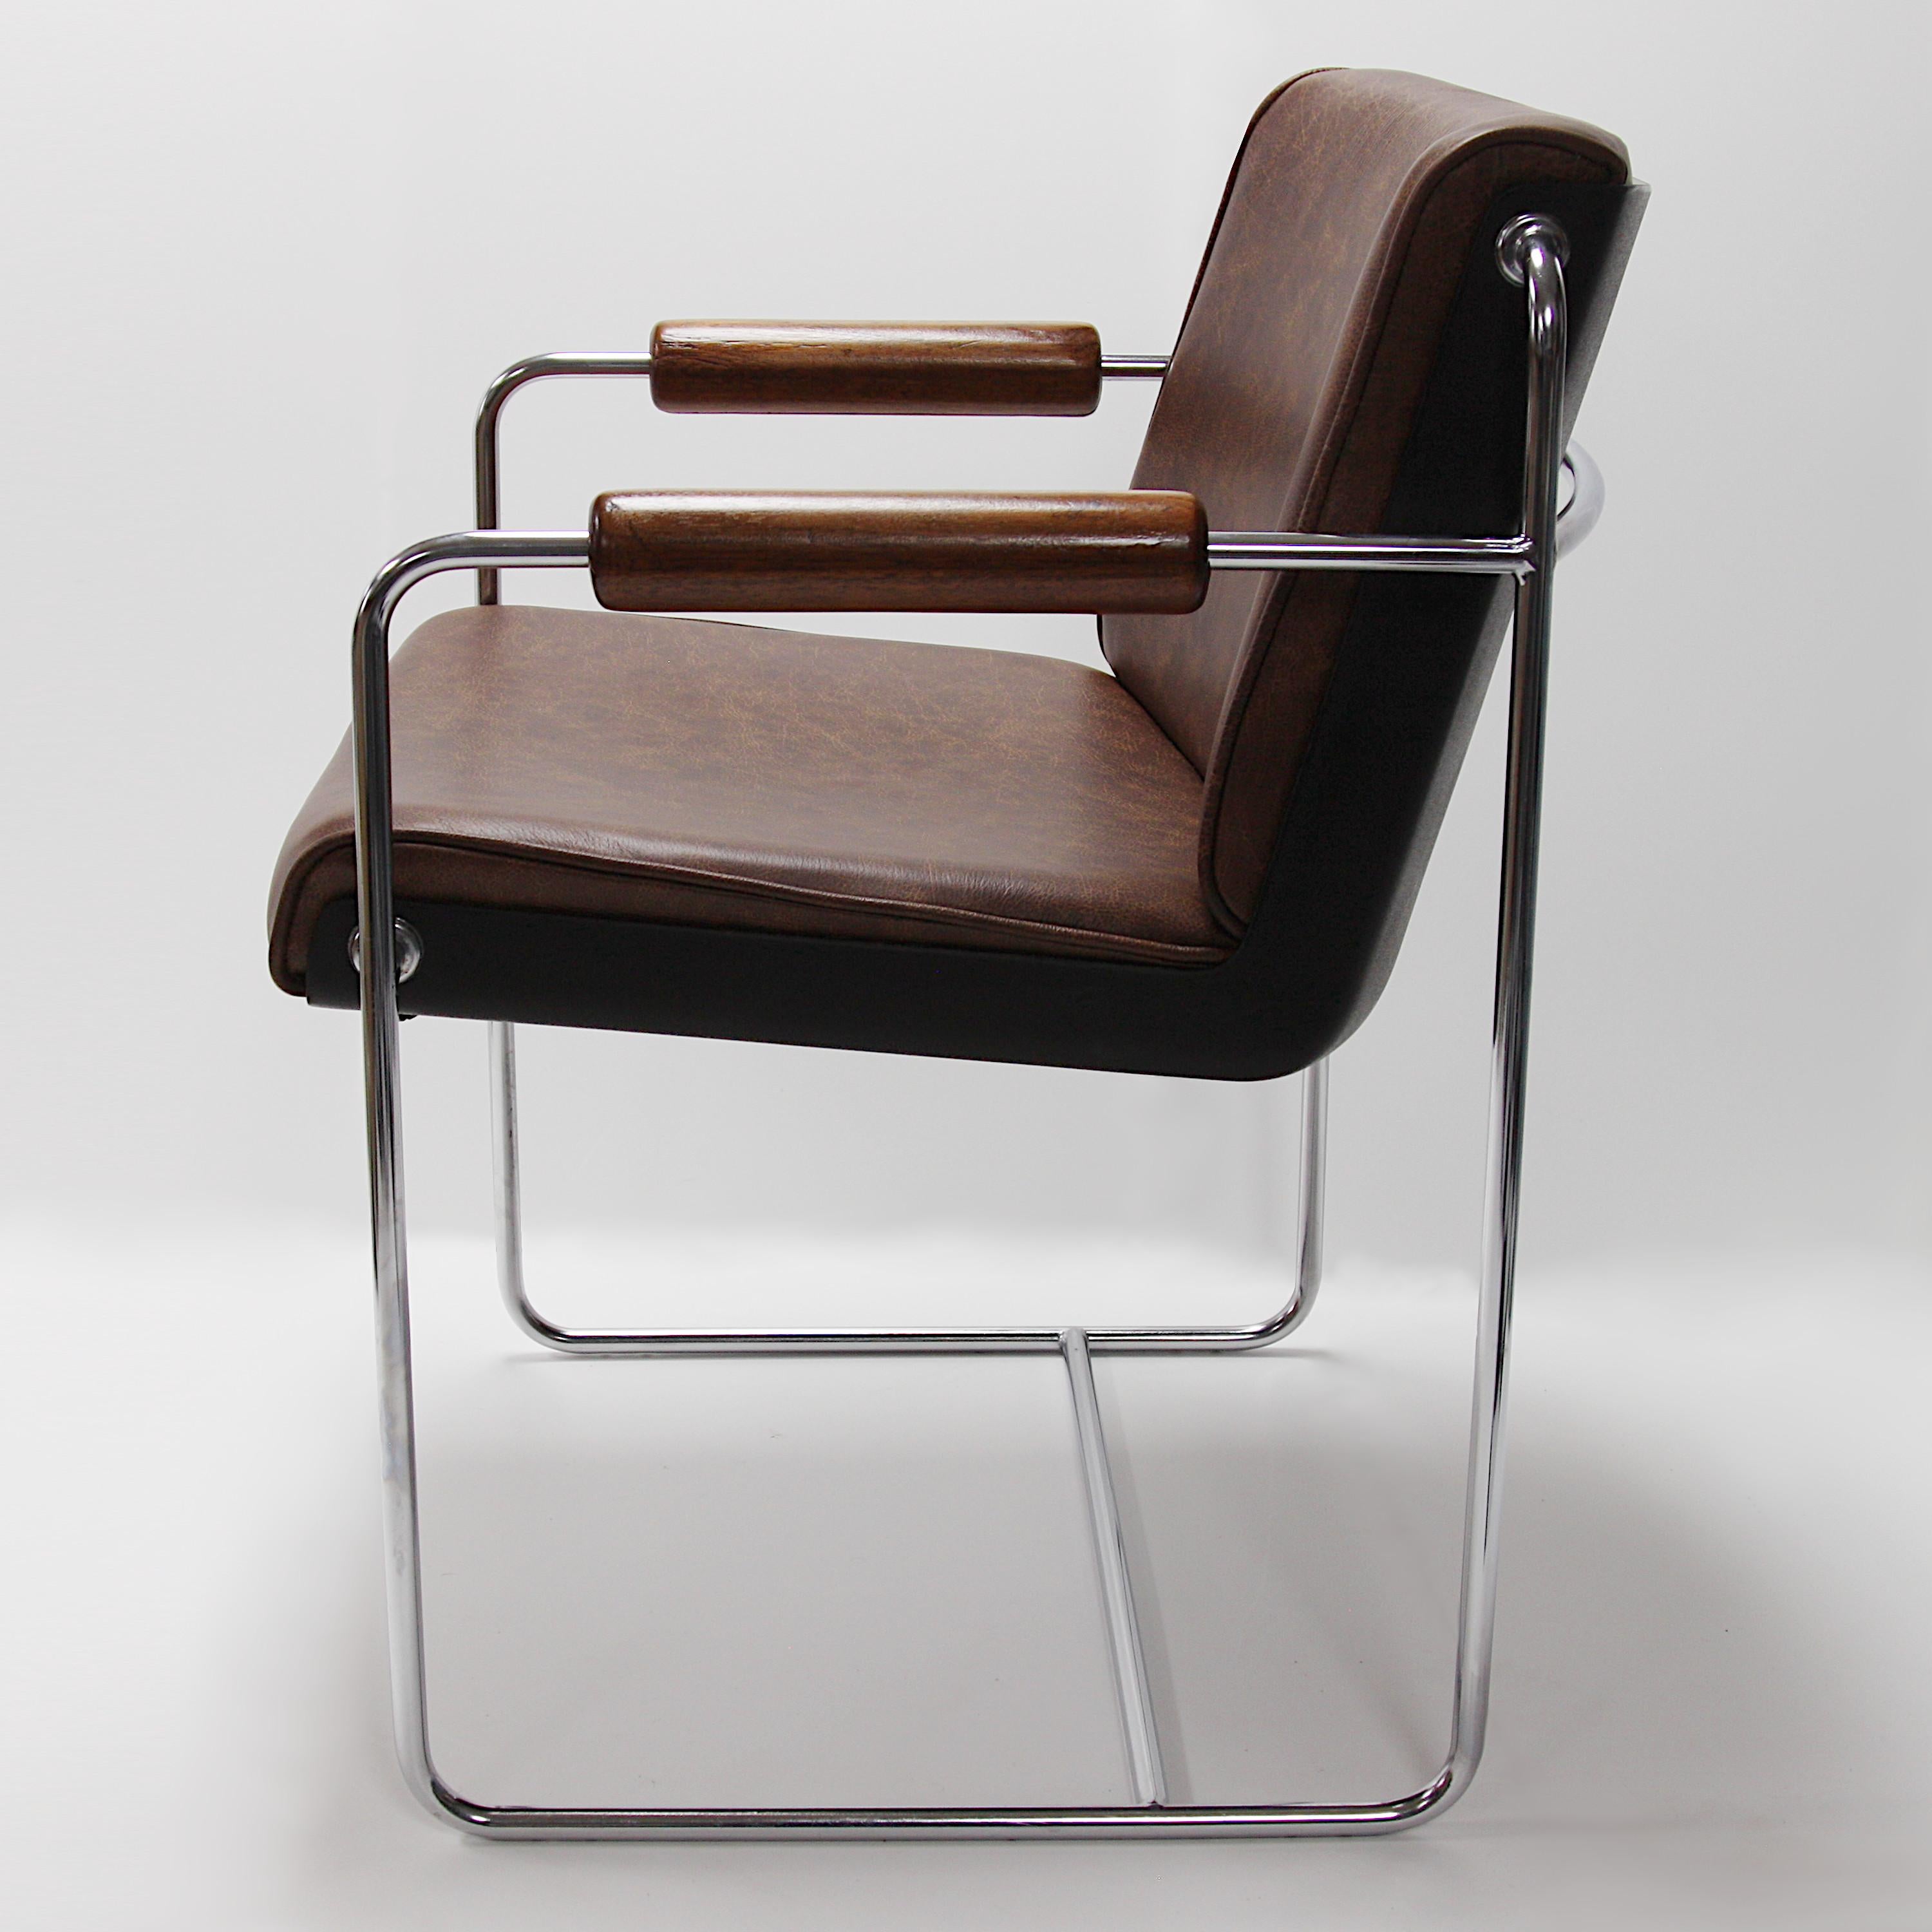 Rare Pair of Mid-Century Modern Fiberglass and Brown Leather Shell Lounge Chairs For Sale 5